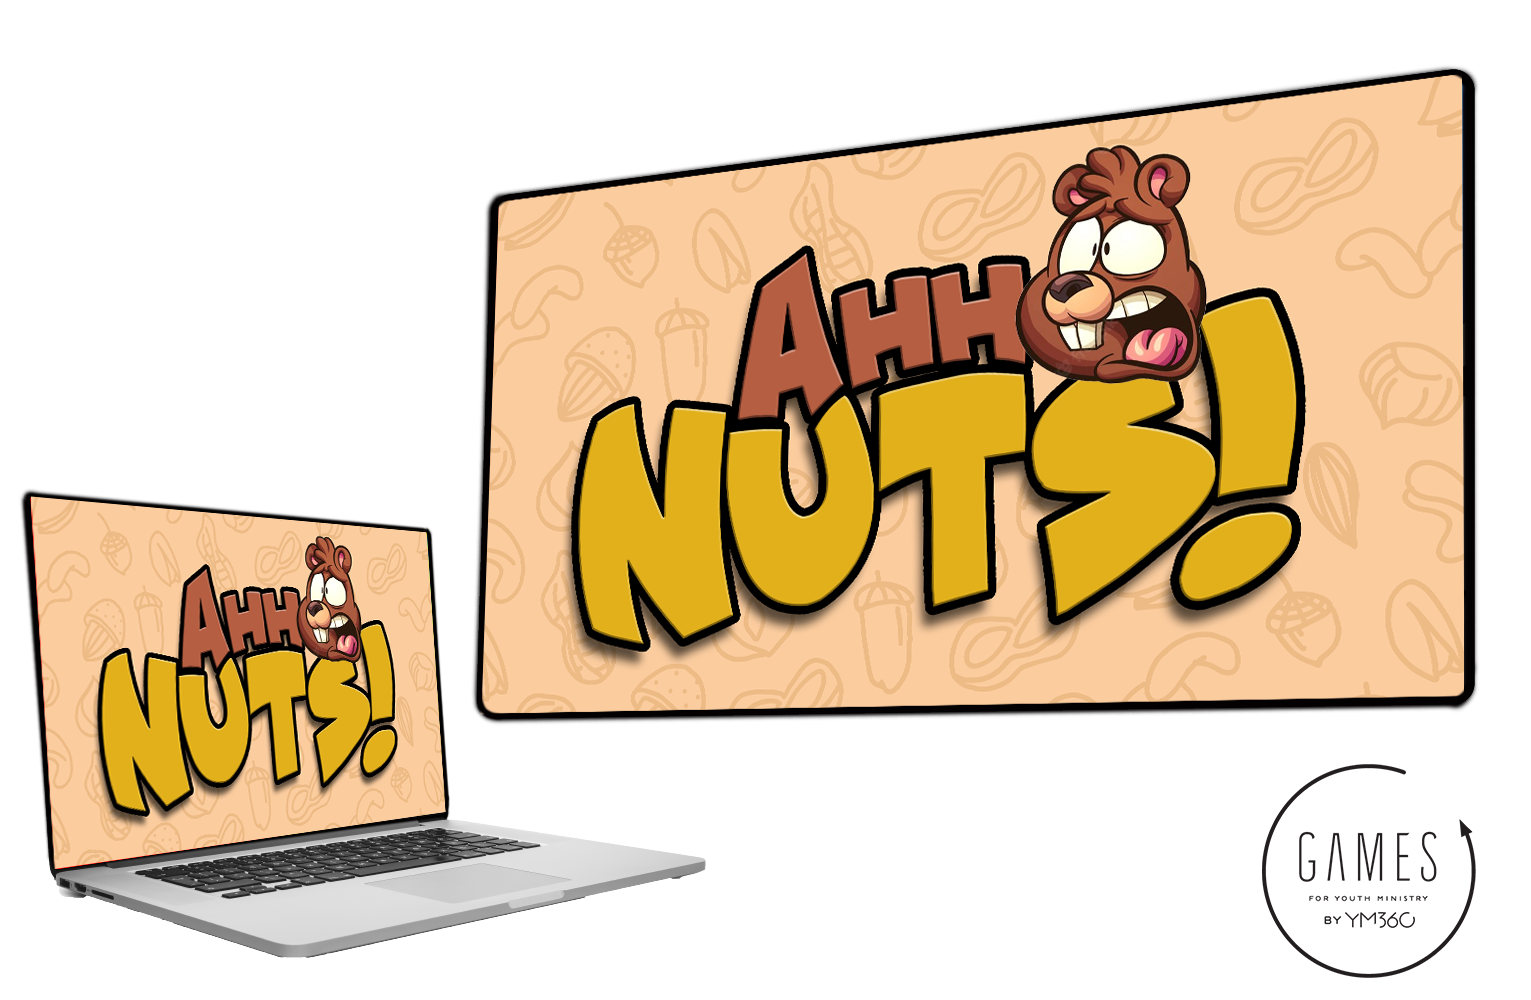 Ahh Nuts!